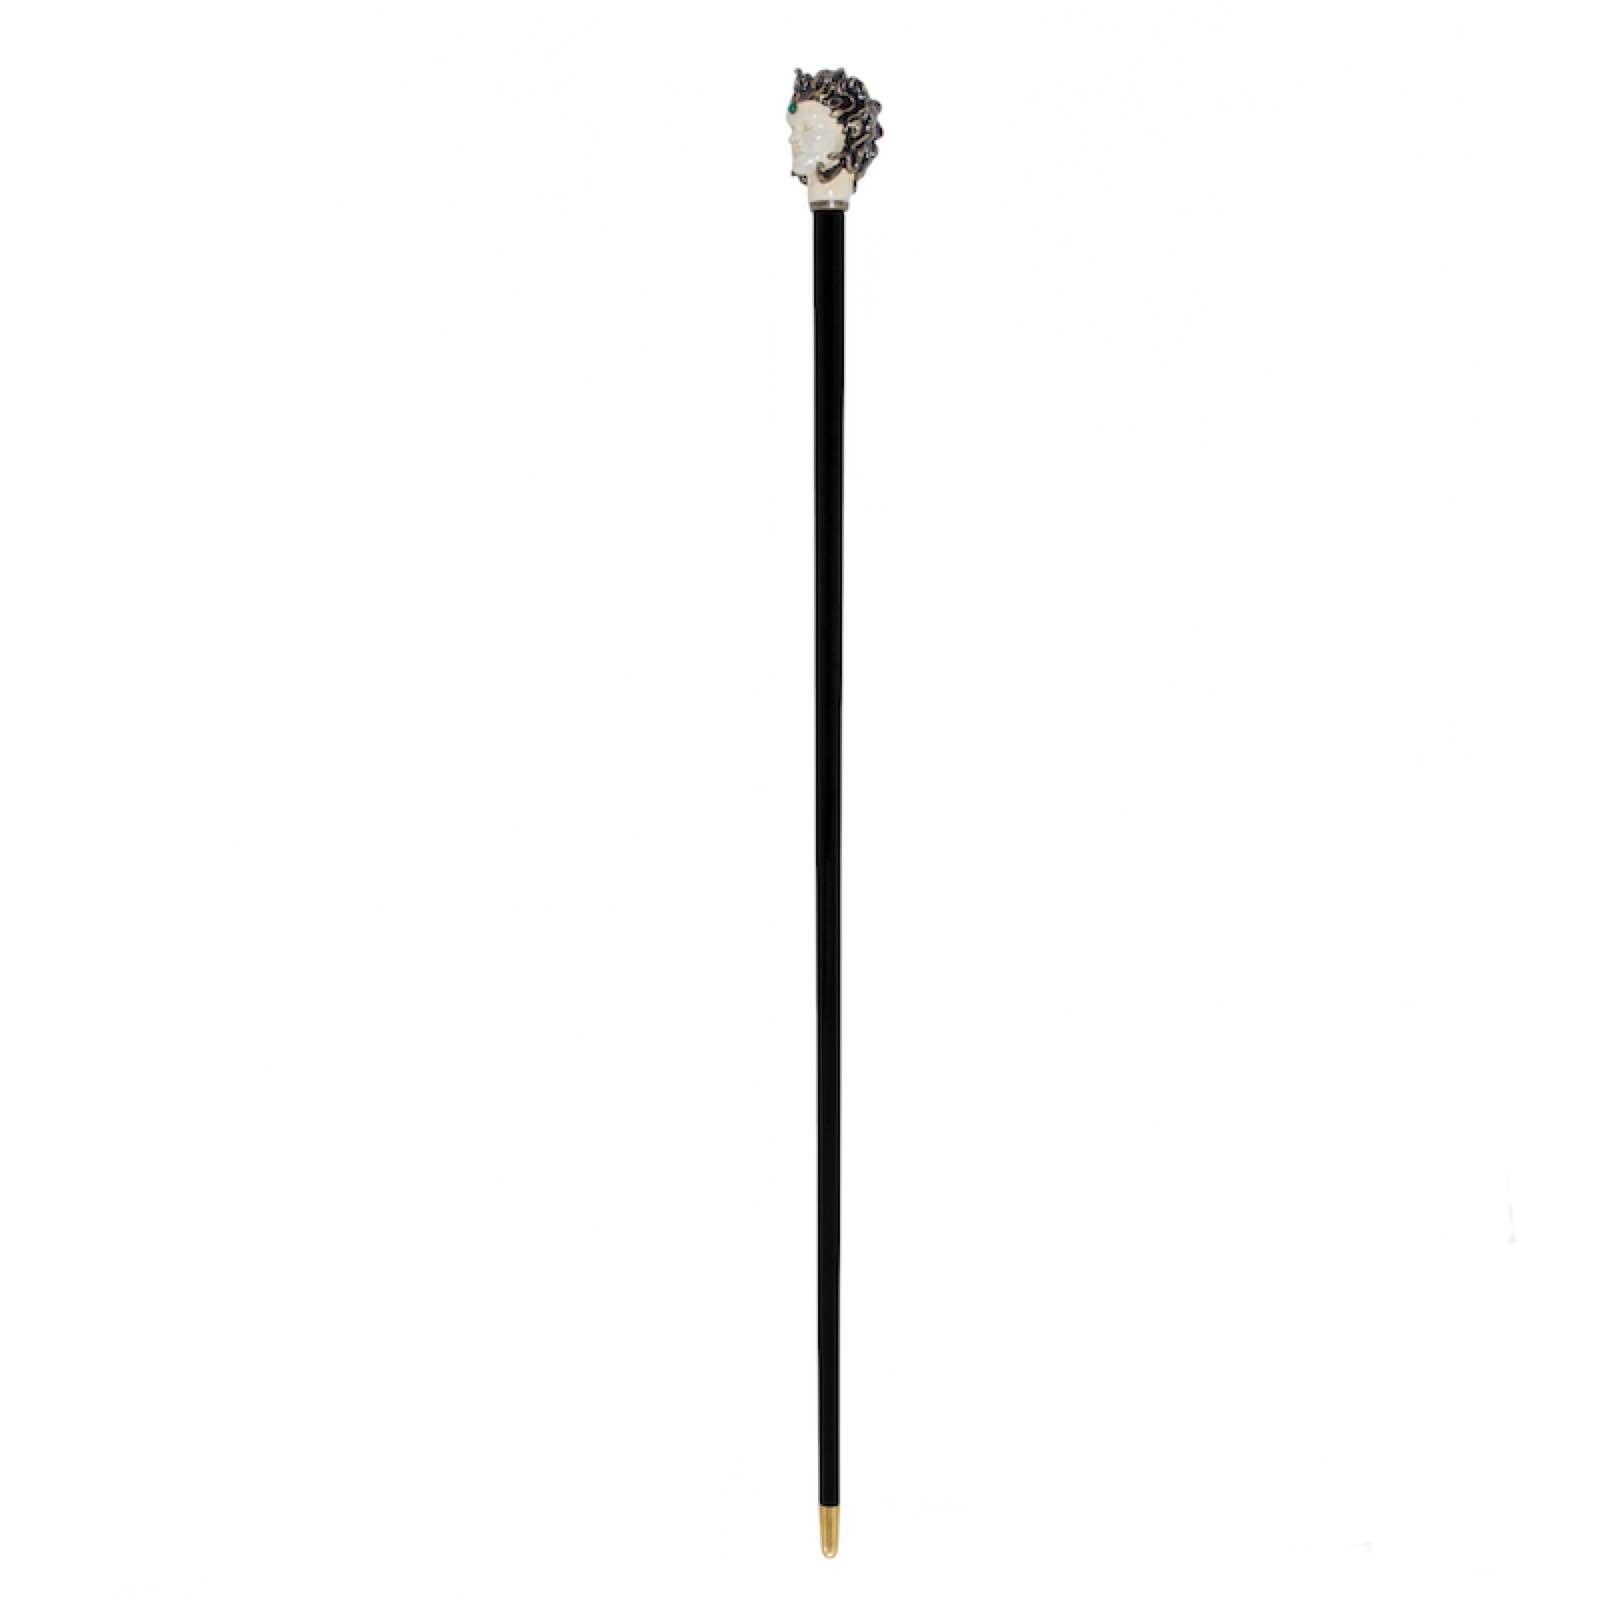 Luxury Walking Sticks and Canes with Silver Handles and Swarovski® Crystals